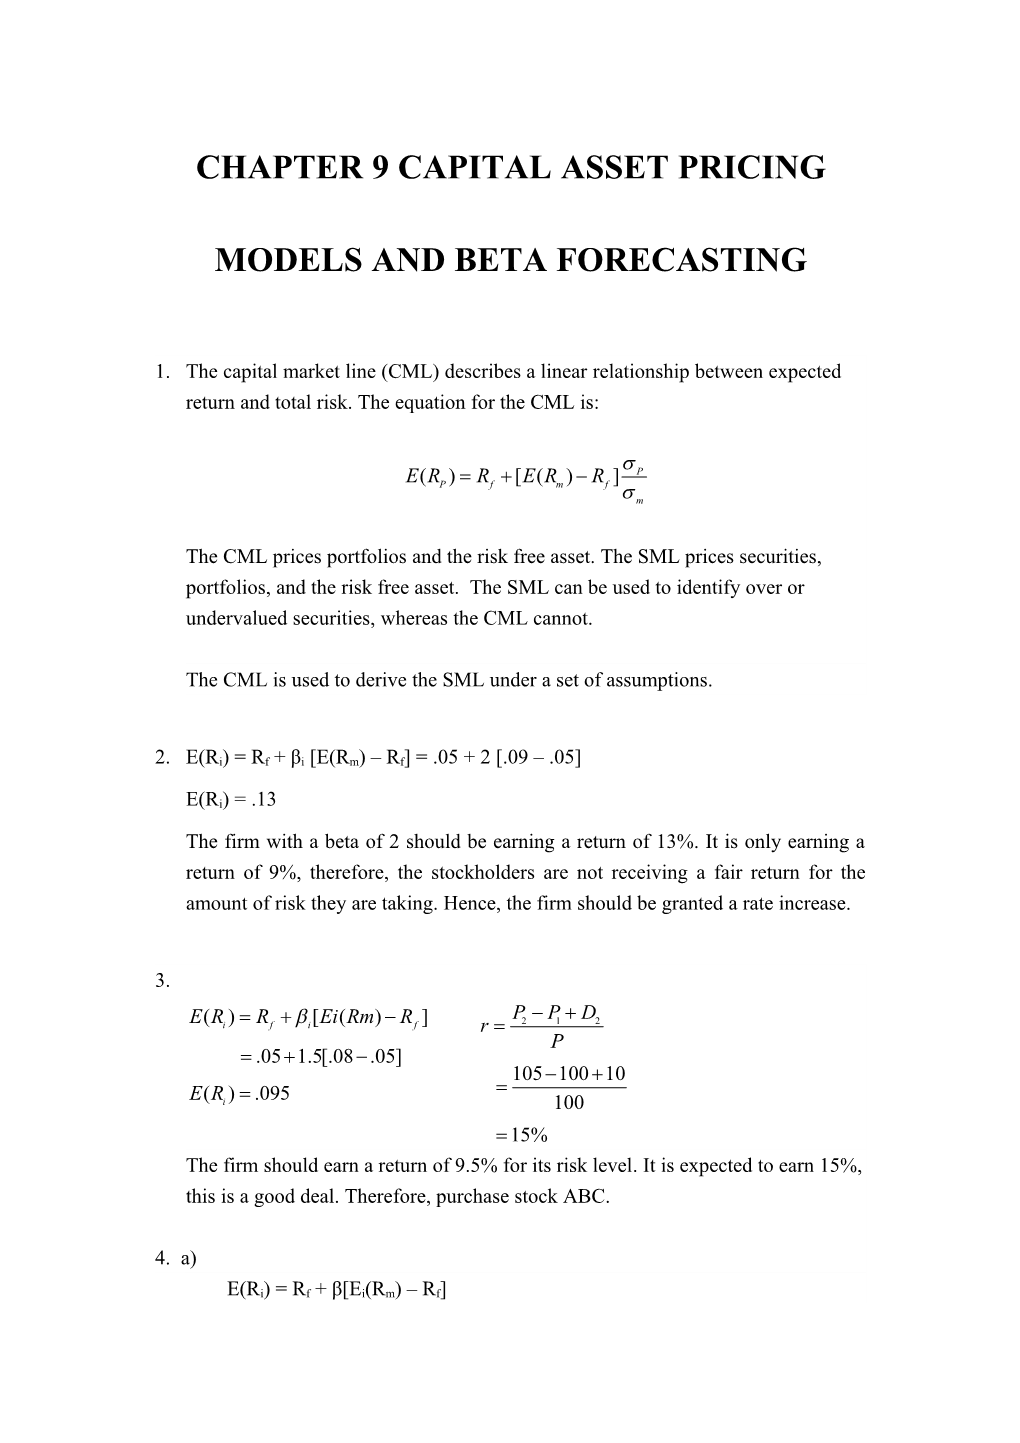 Chapter 9 Capital Asset Pricing Models and Beta Forecasting